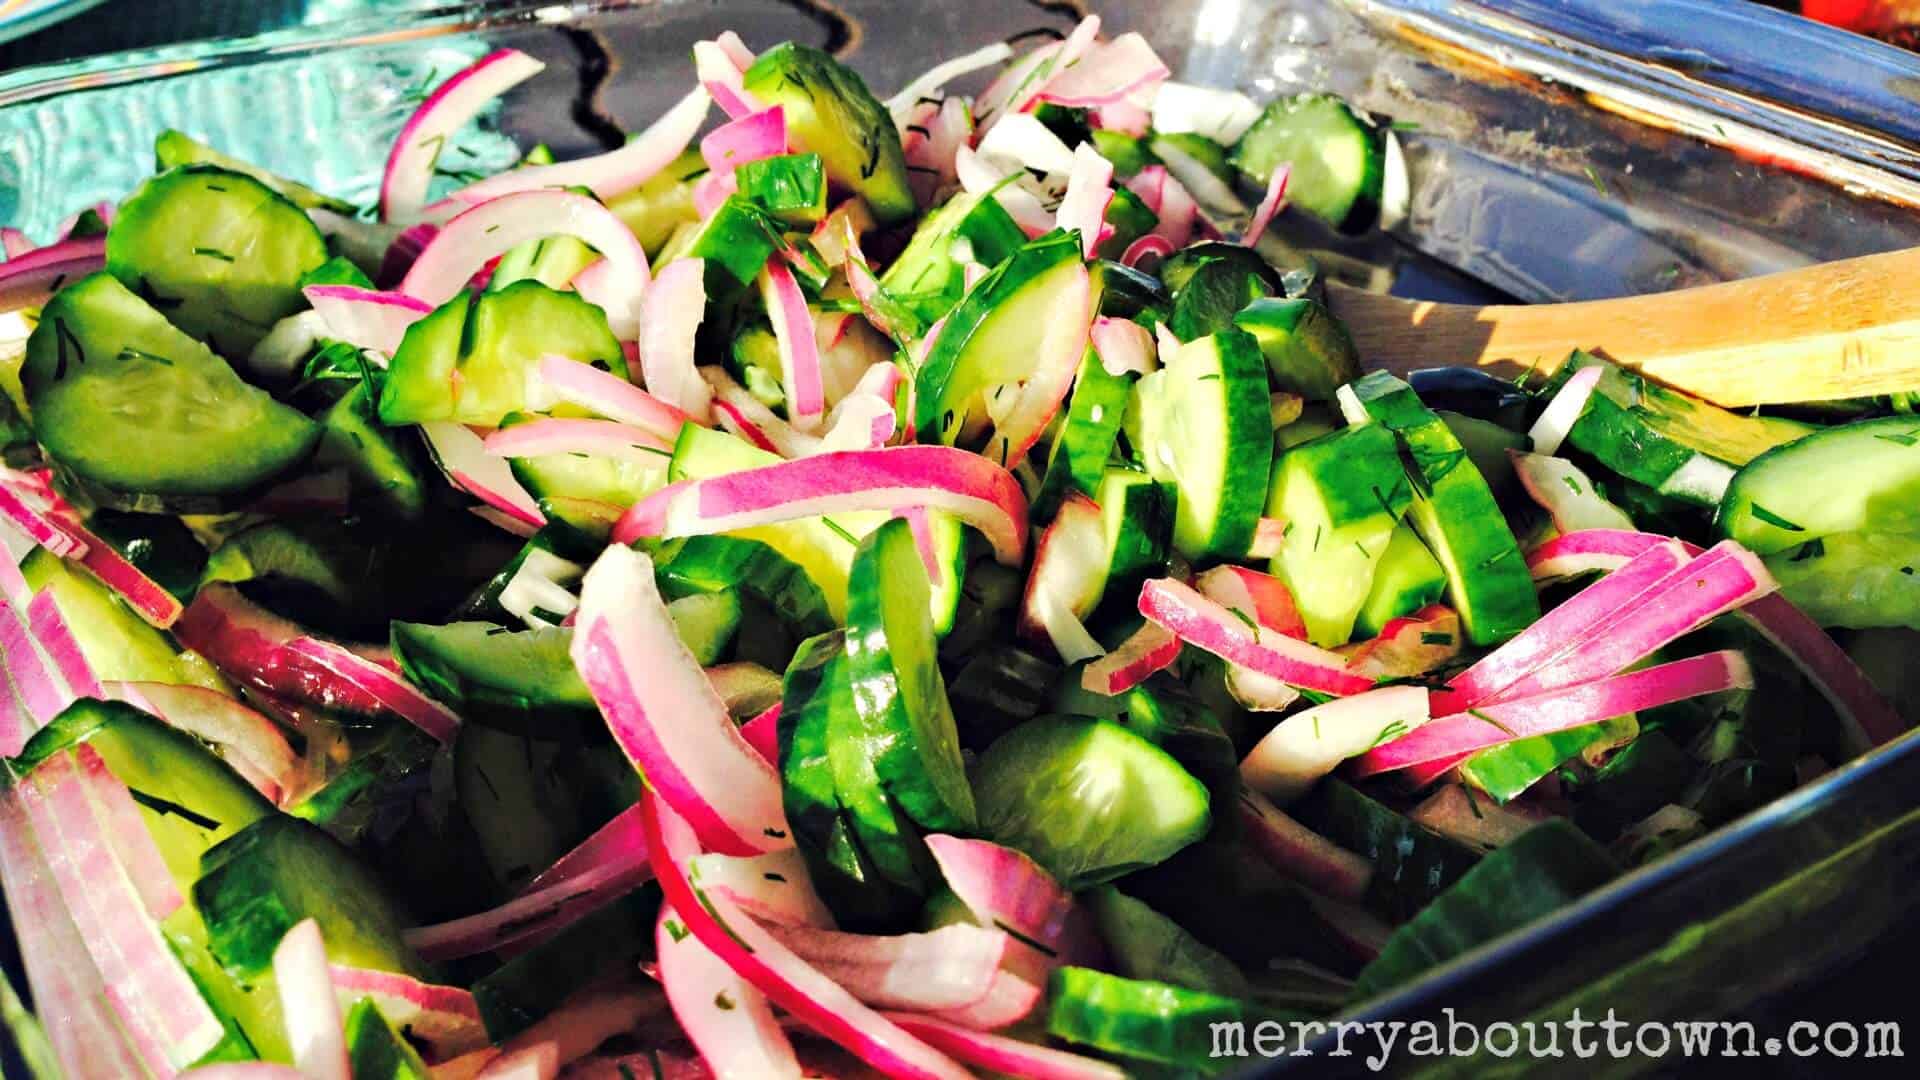 Red Onion & Cucumber Salad with Vinegar Dressing